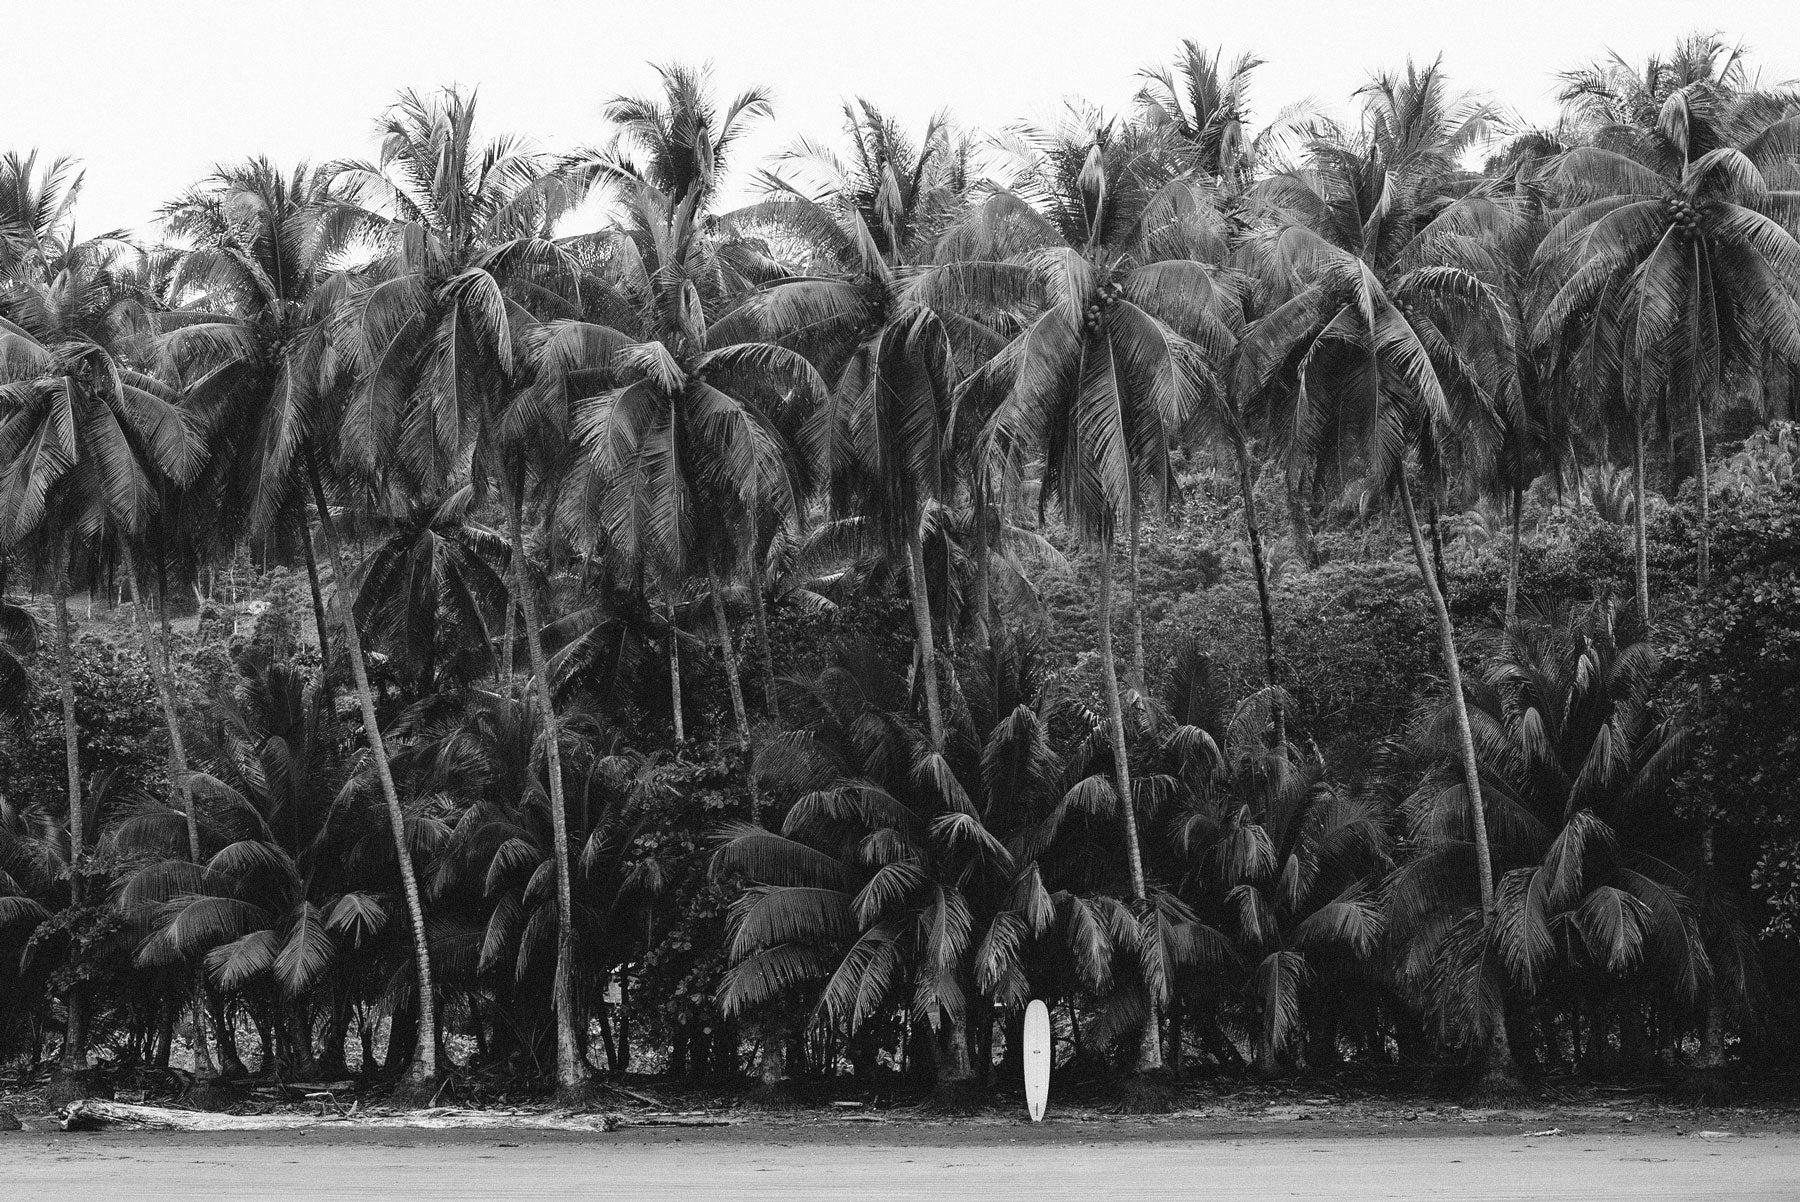 Fine art photography prints by Kristen M Brown. Black and white palm trees and surfboard photo print.